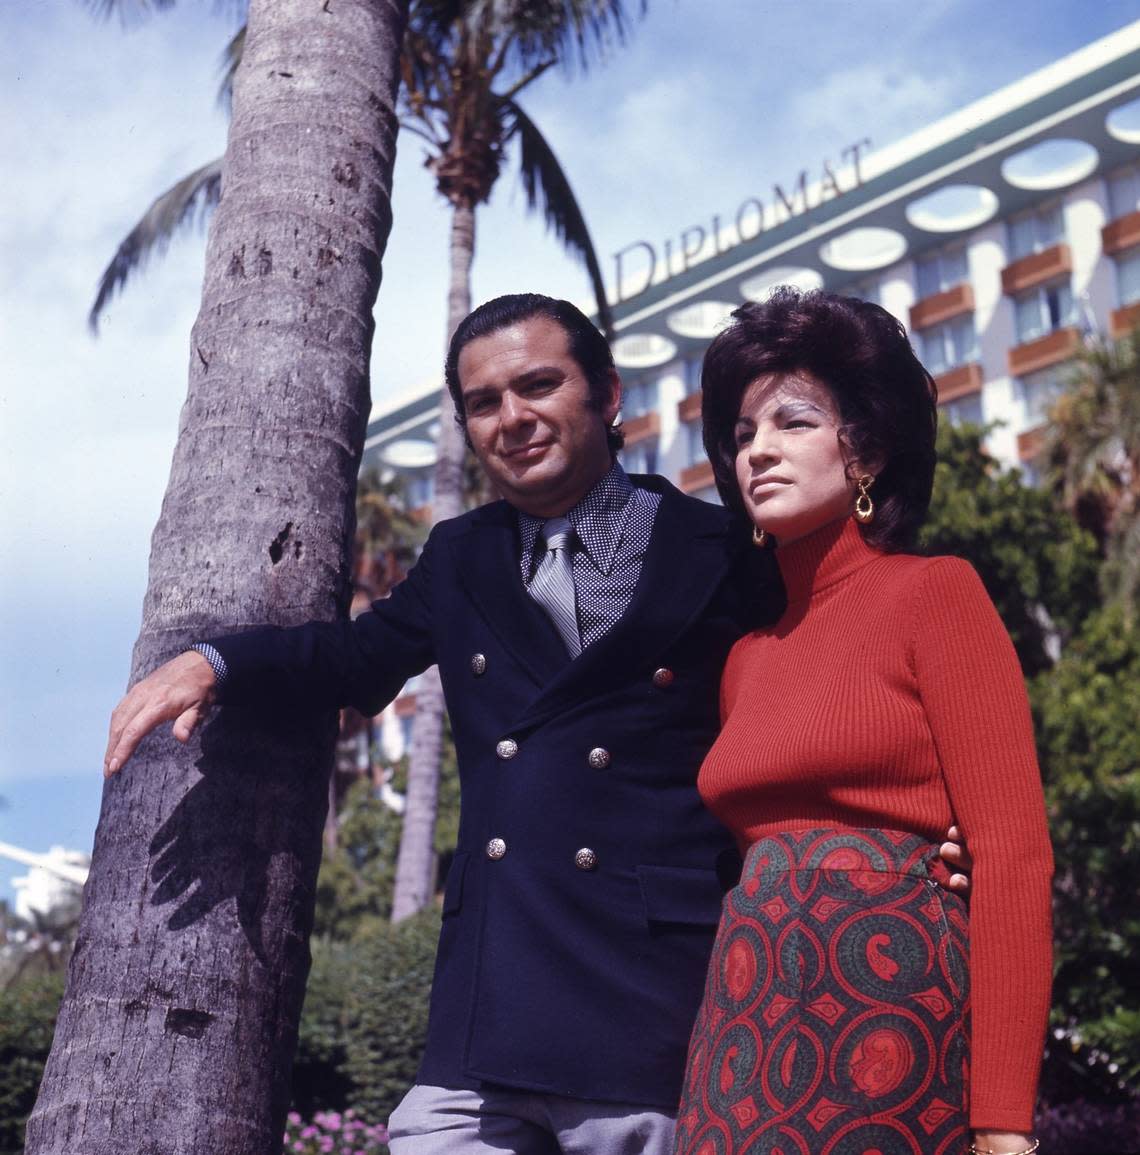 Irving and Marge Cowan.